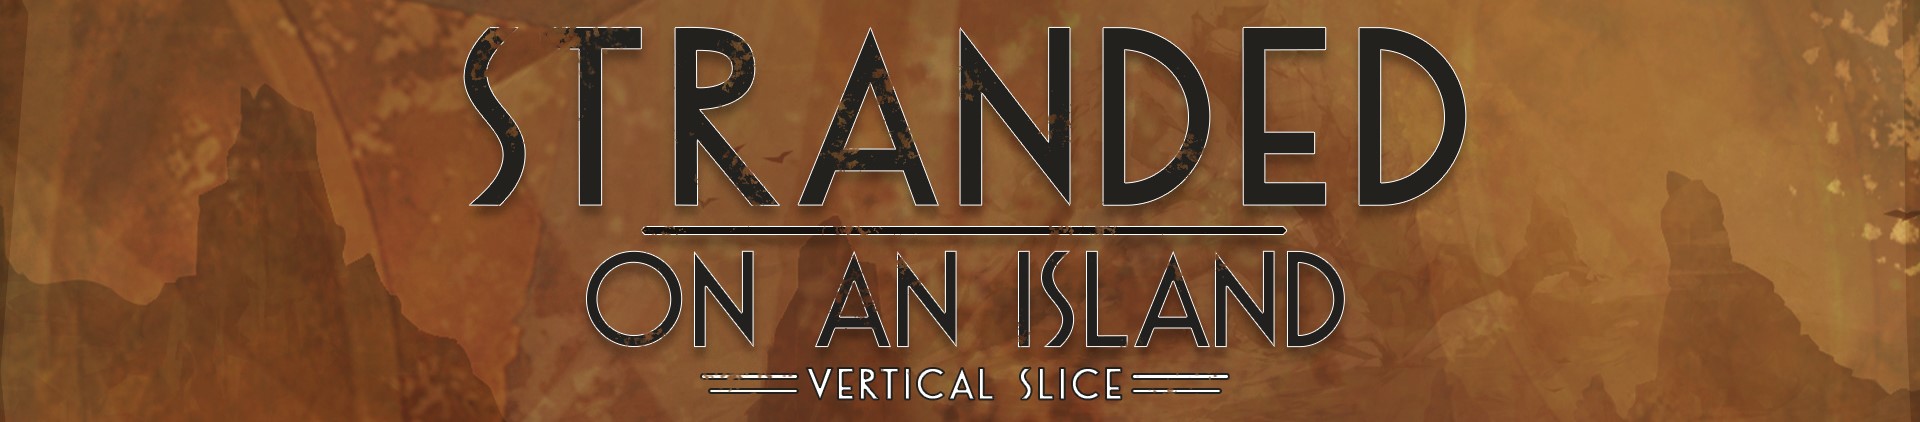 Stranded On An Island banner